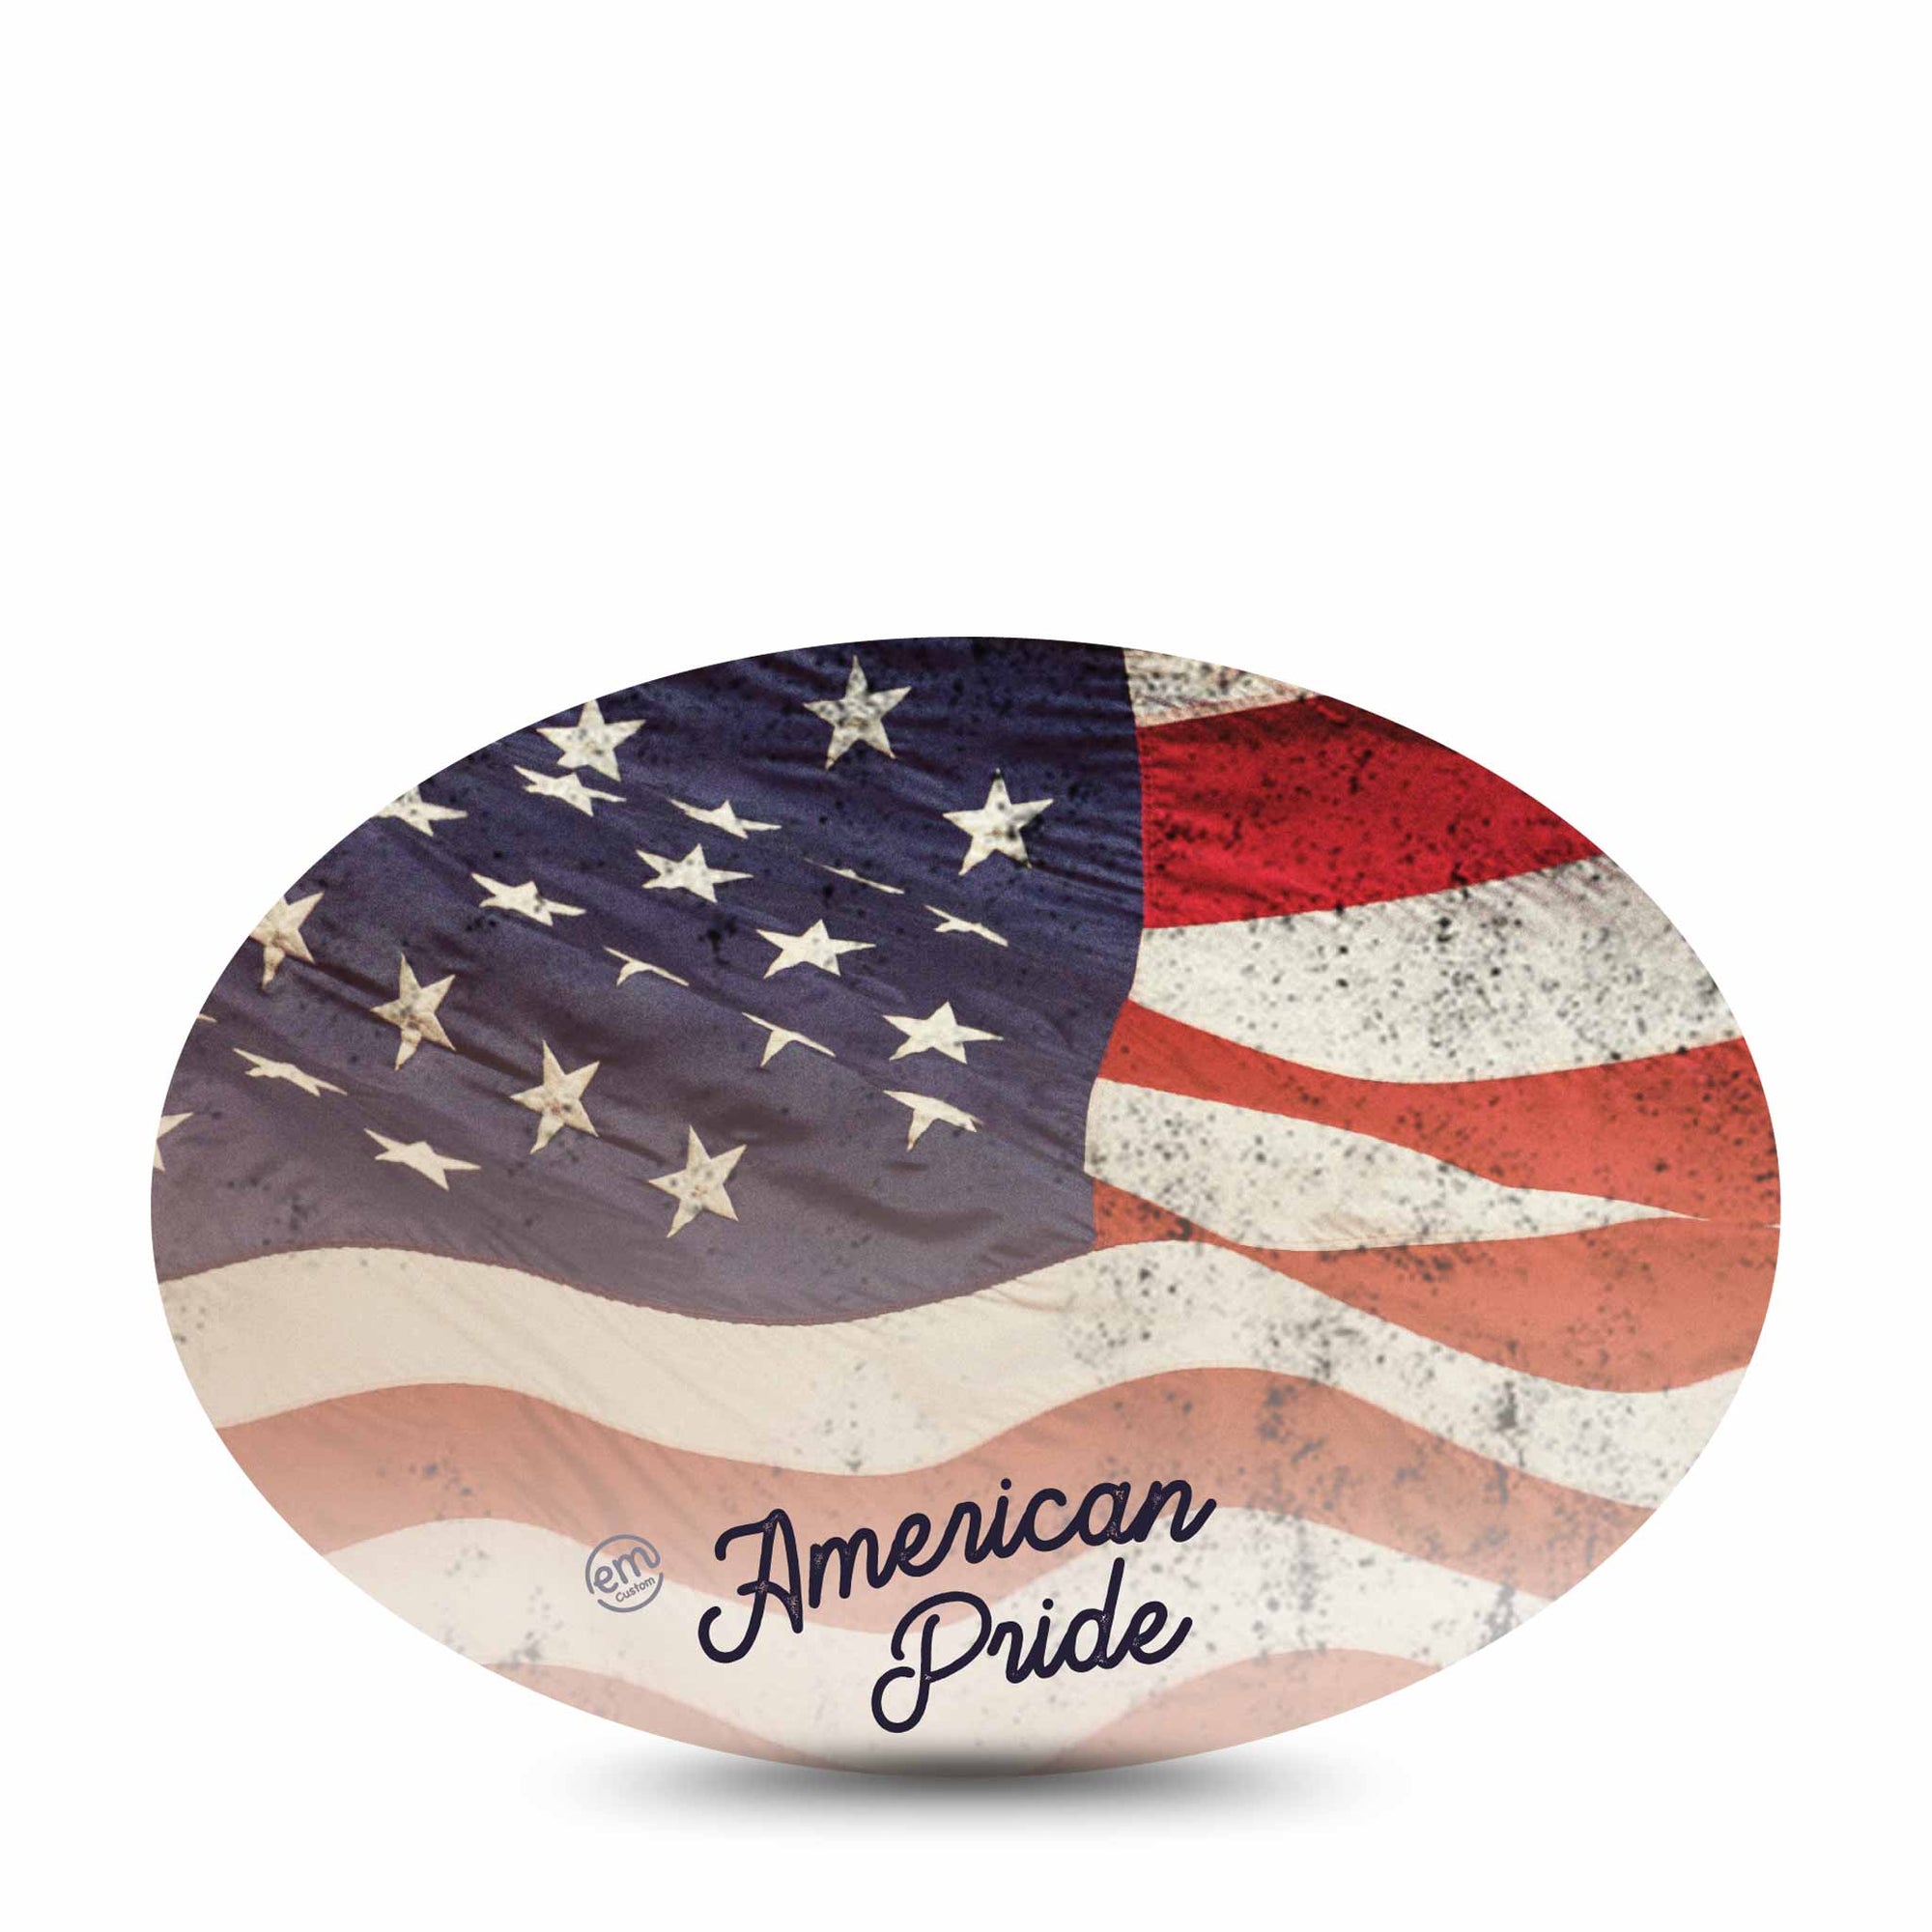 Medtronic Enlite / Guardian ExpressionMed American Pride Universal Oval Tape, Single Tape, USA Flag "american pride" wording themed Medtronic Overlay Patch Design